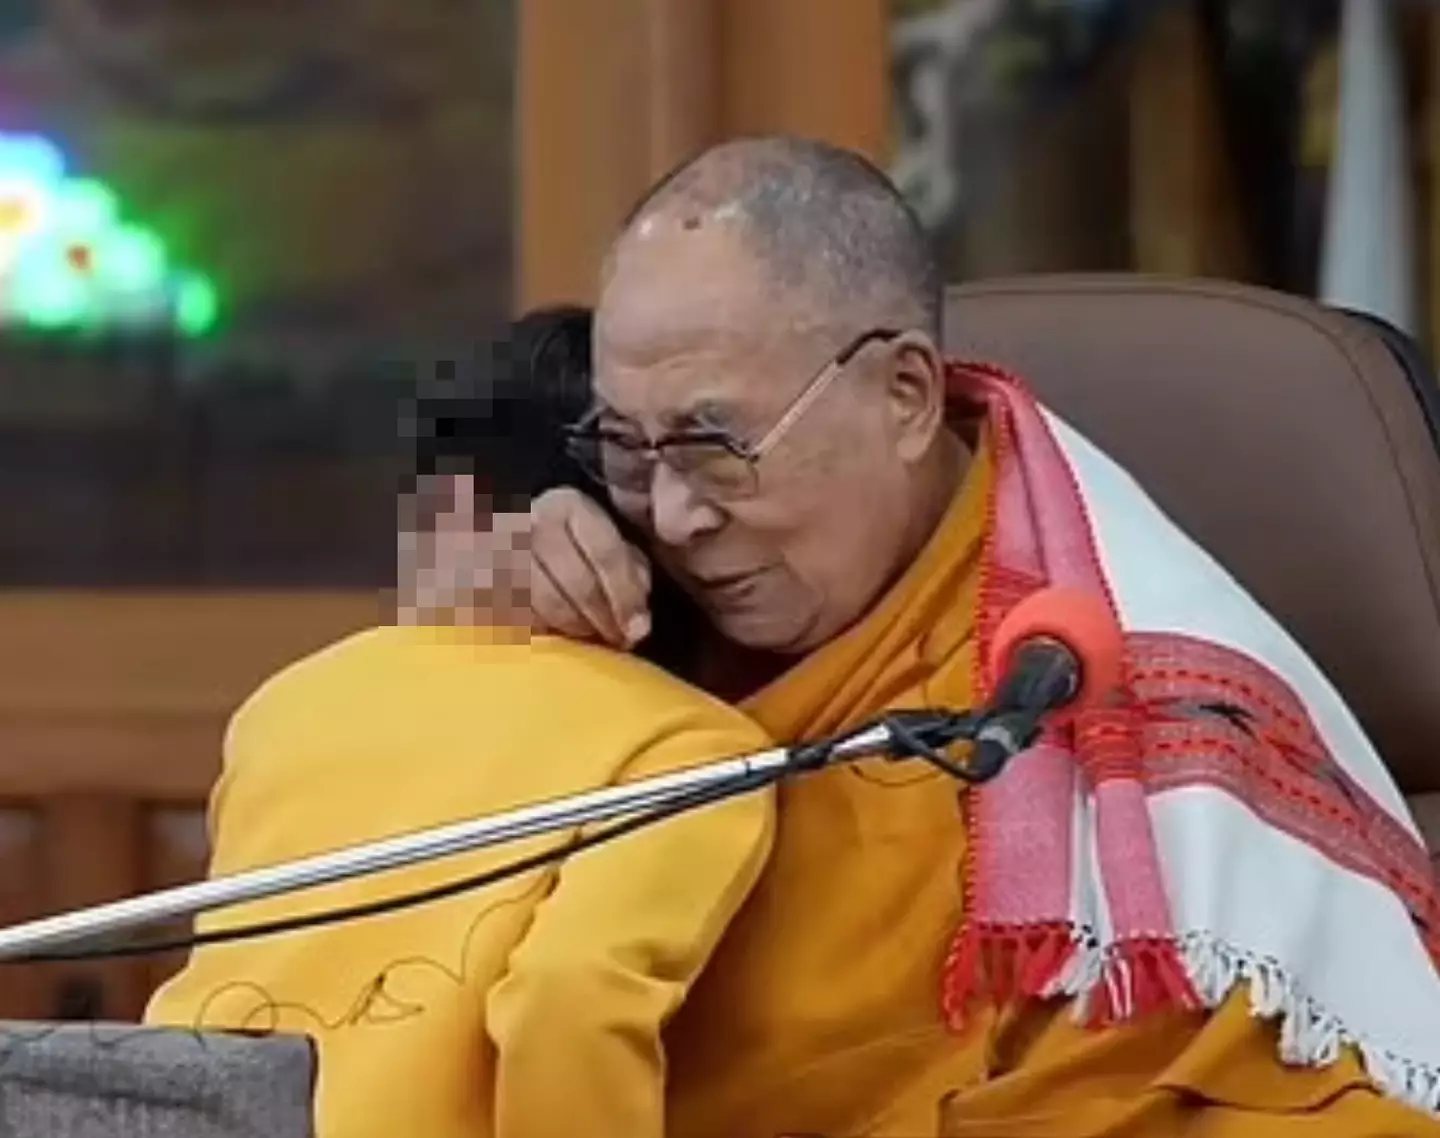 The Dalai Lama was seen hugging and kissing a child in the footage.